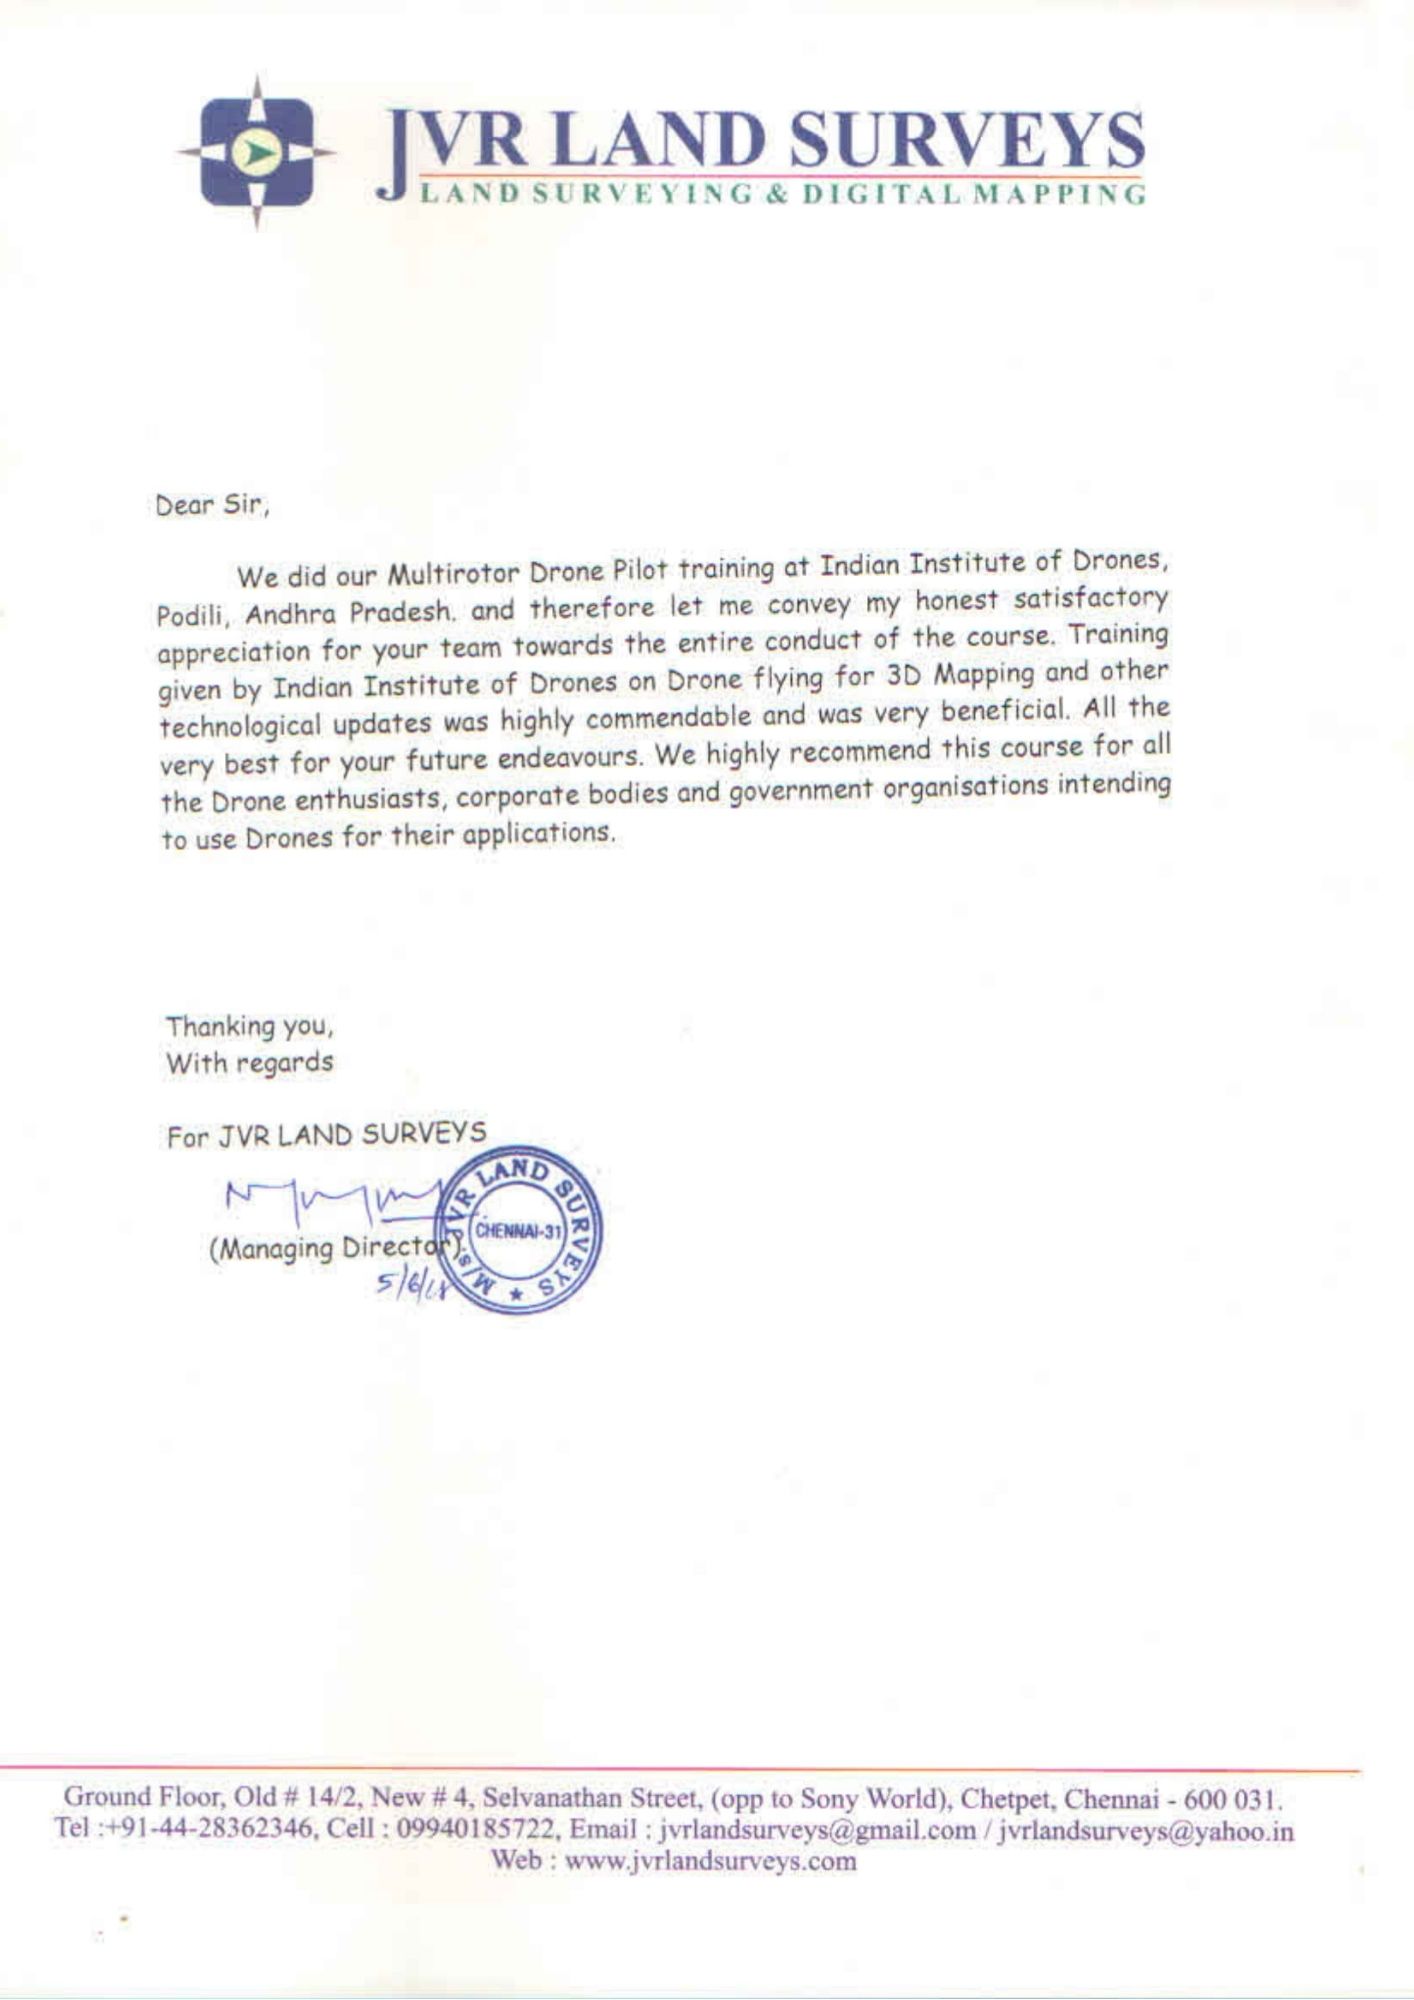 Satisfactory Letter for Drone Training Received from JVR Land Surveys